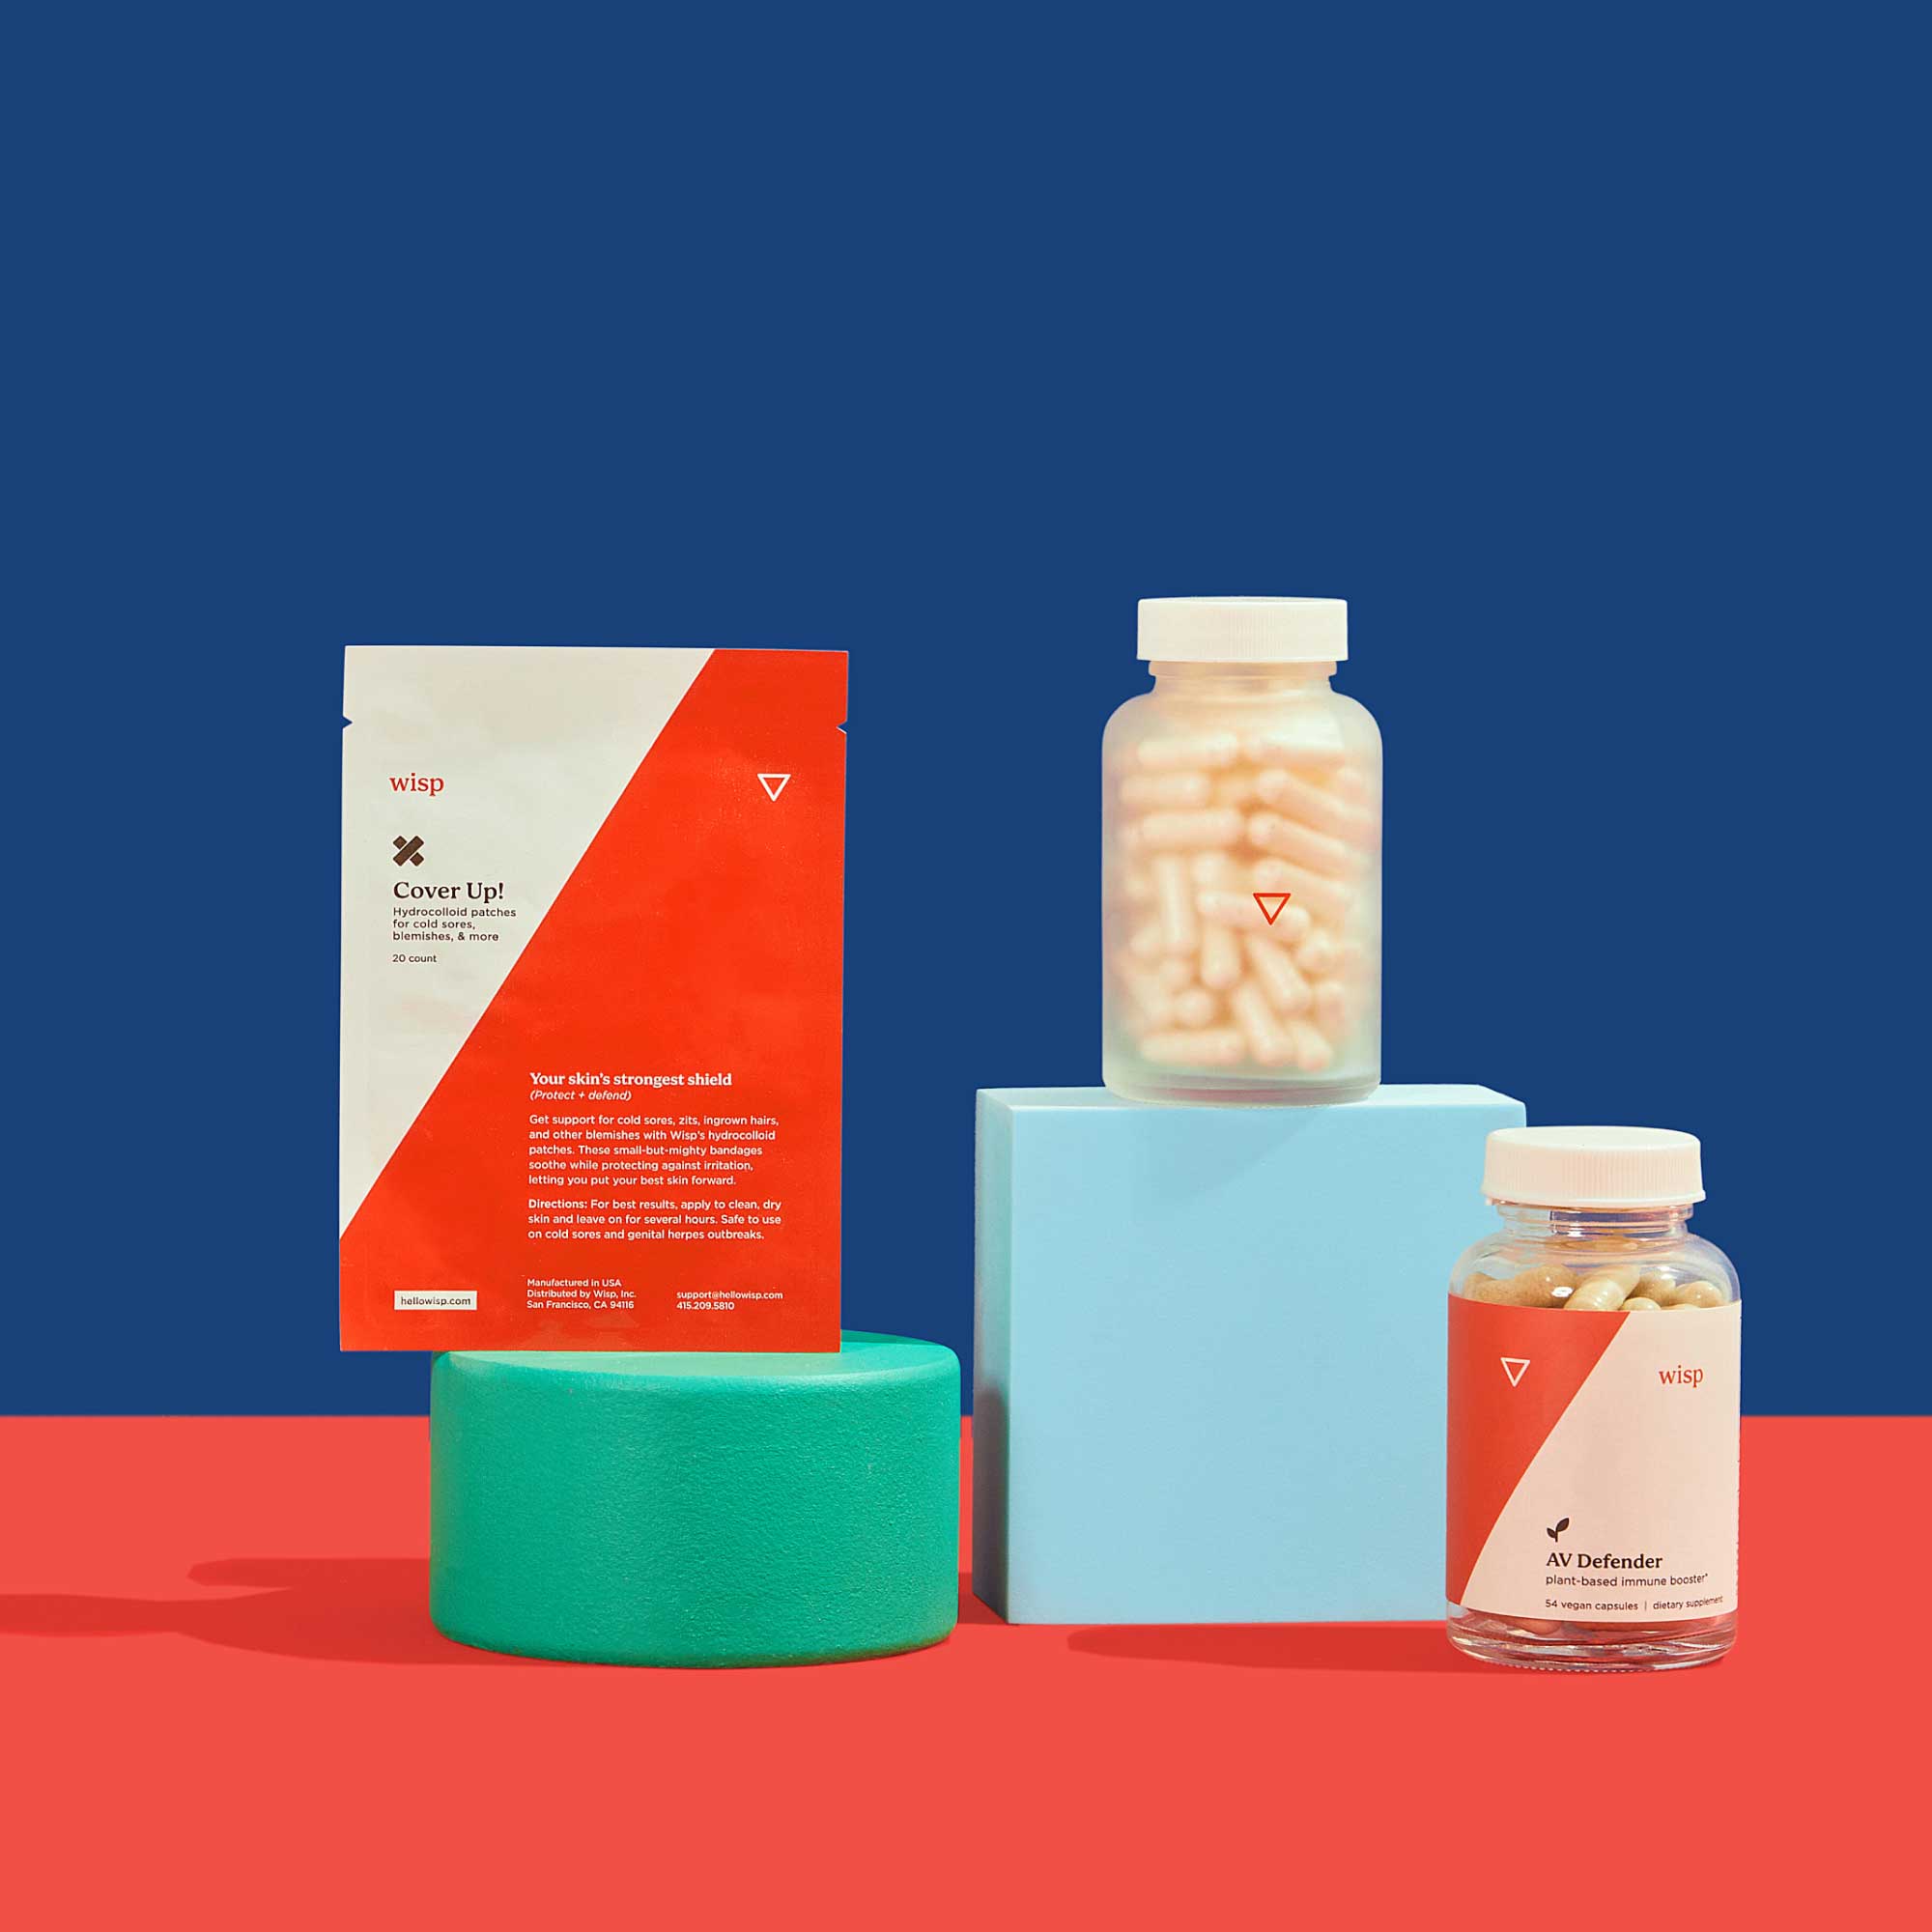 Wisp Cover Up! Hydrocolloid patches, a tall glass pill jar, and AV Defender balanced on colorful abstract shapes on a red surface with a blue background